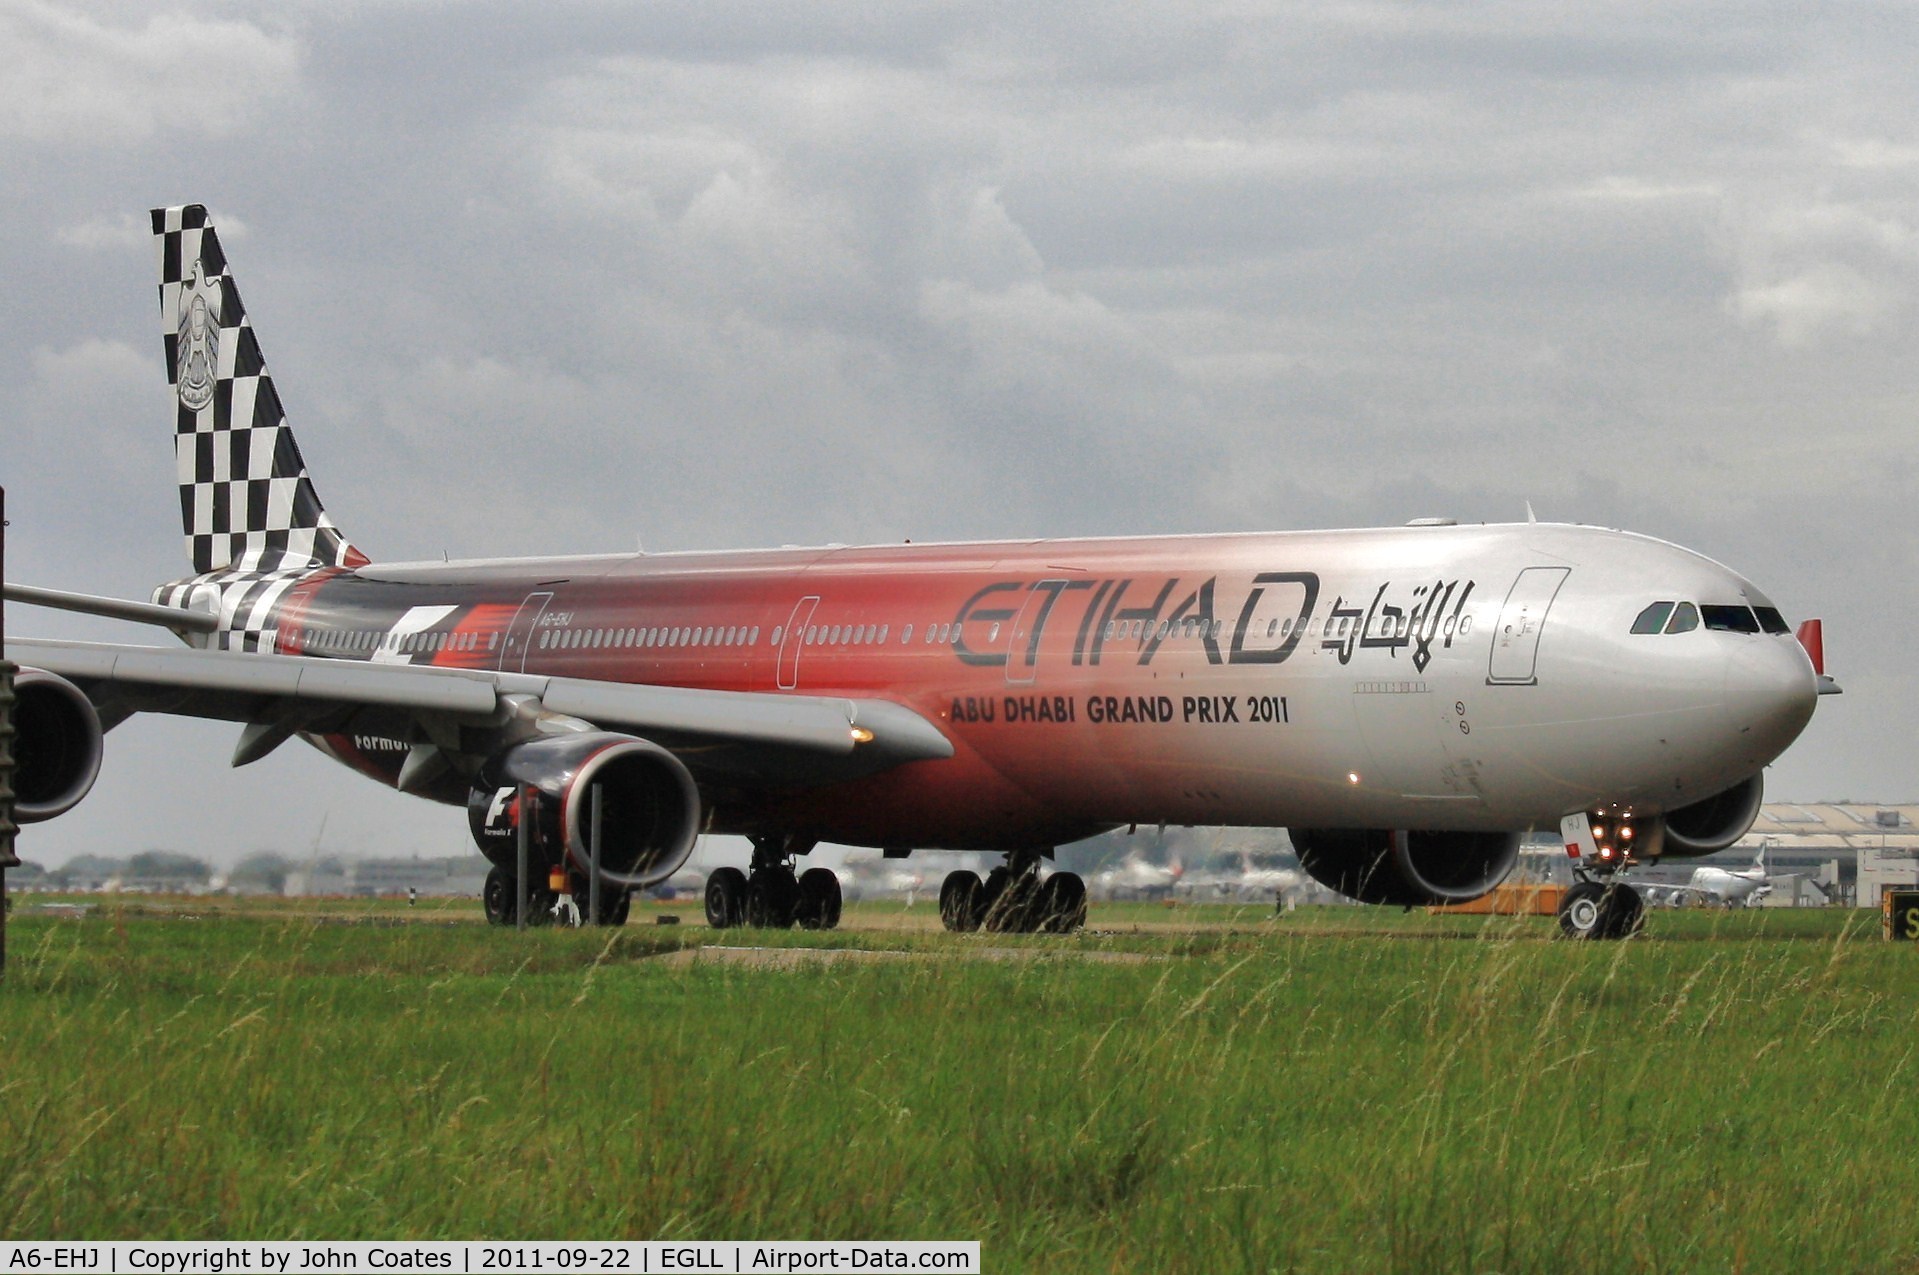 A6-EHJ, 2008 Airbus A340-642X C/N 933, Taxiing to 27L